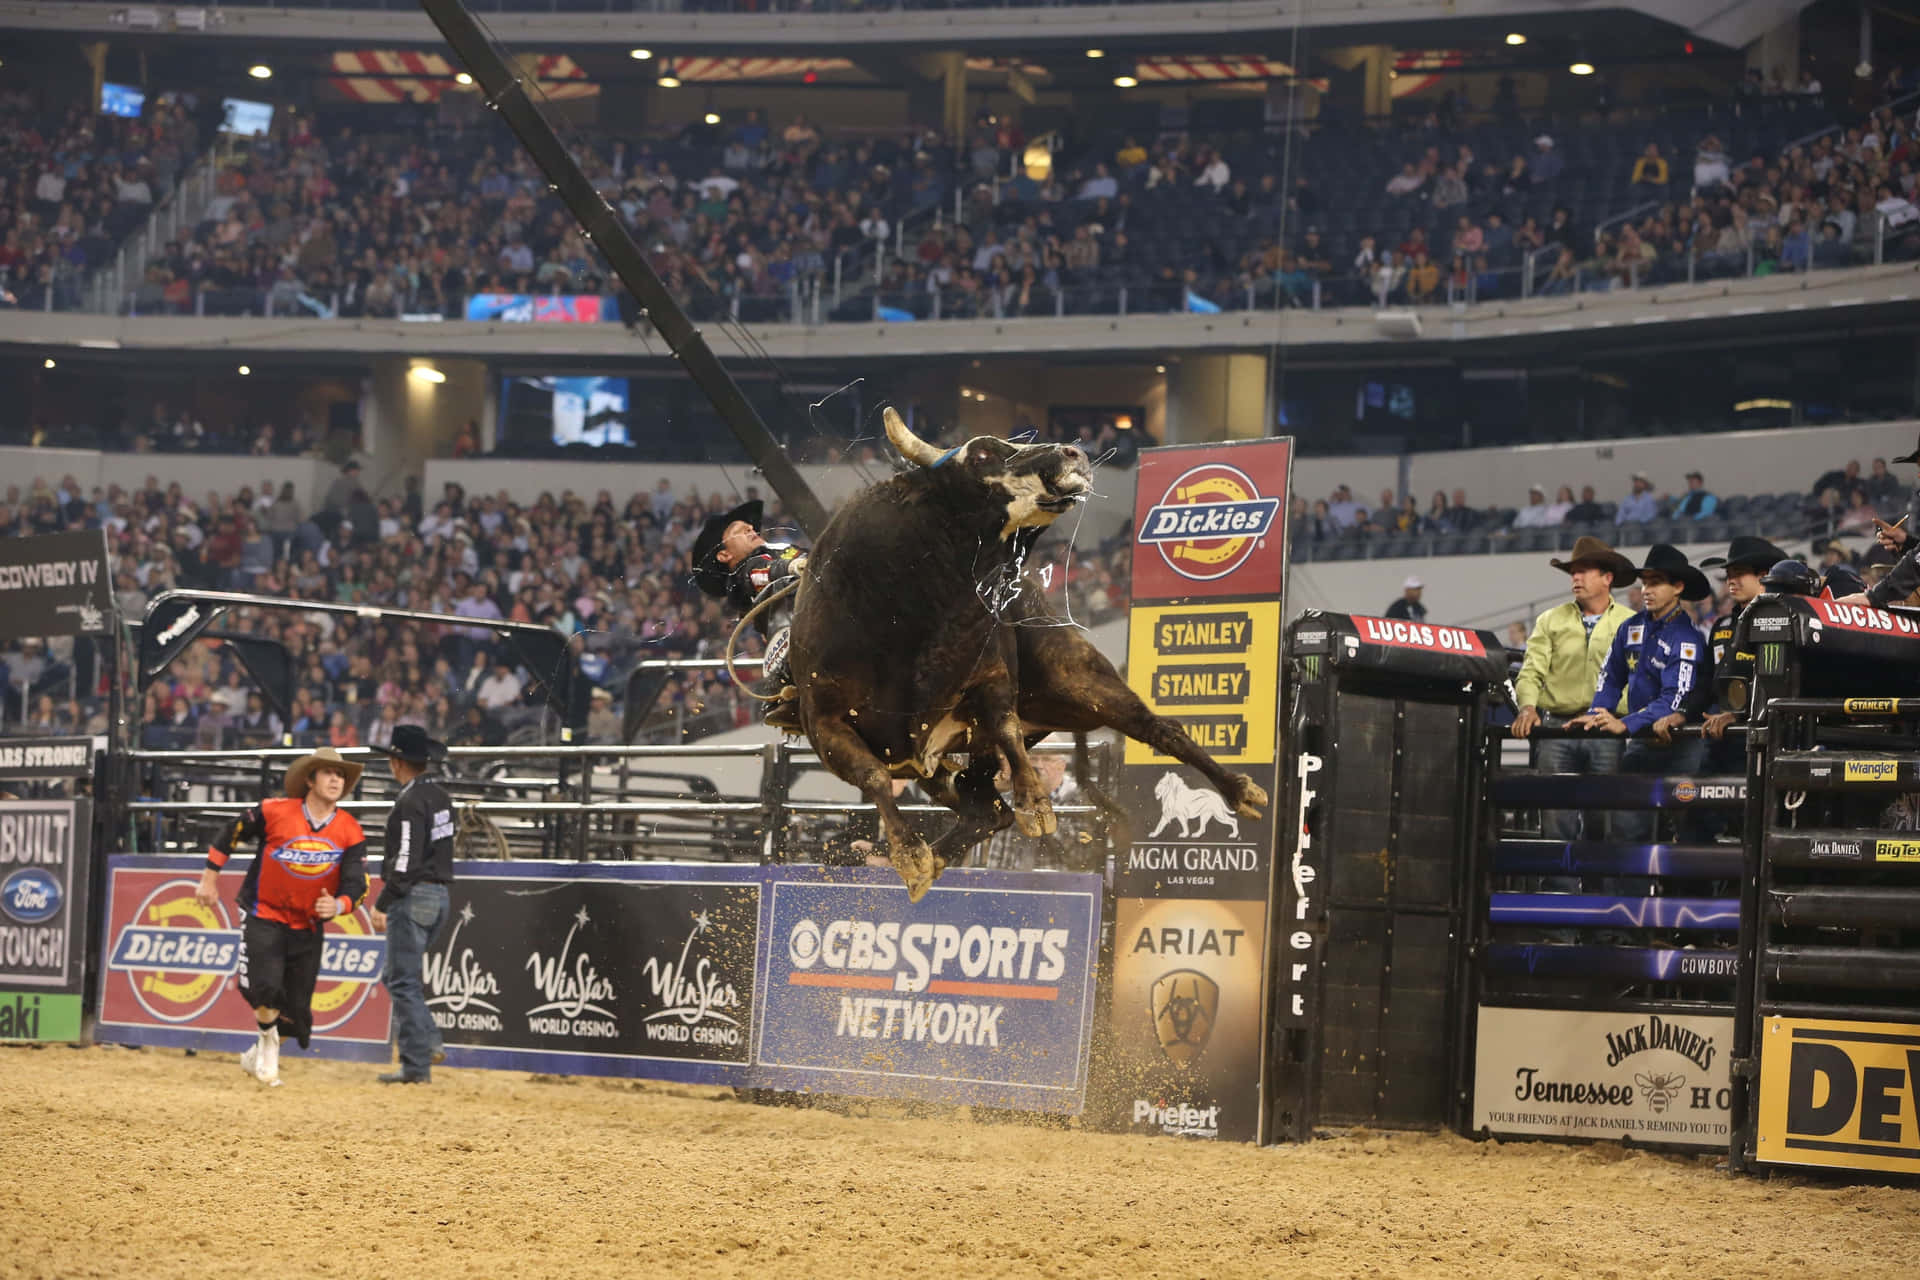 "Holding tight for the ride of his life, this bull rider is ready to defy the odds"